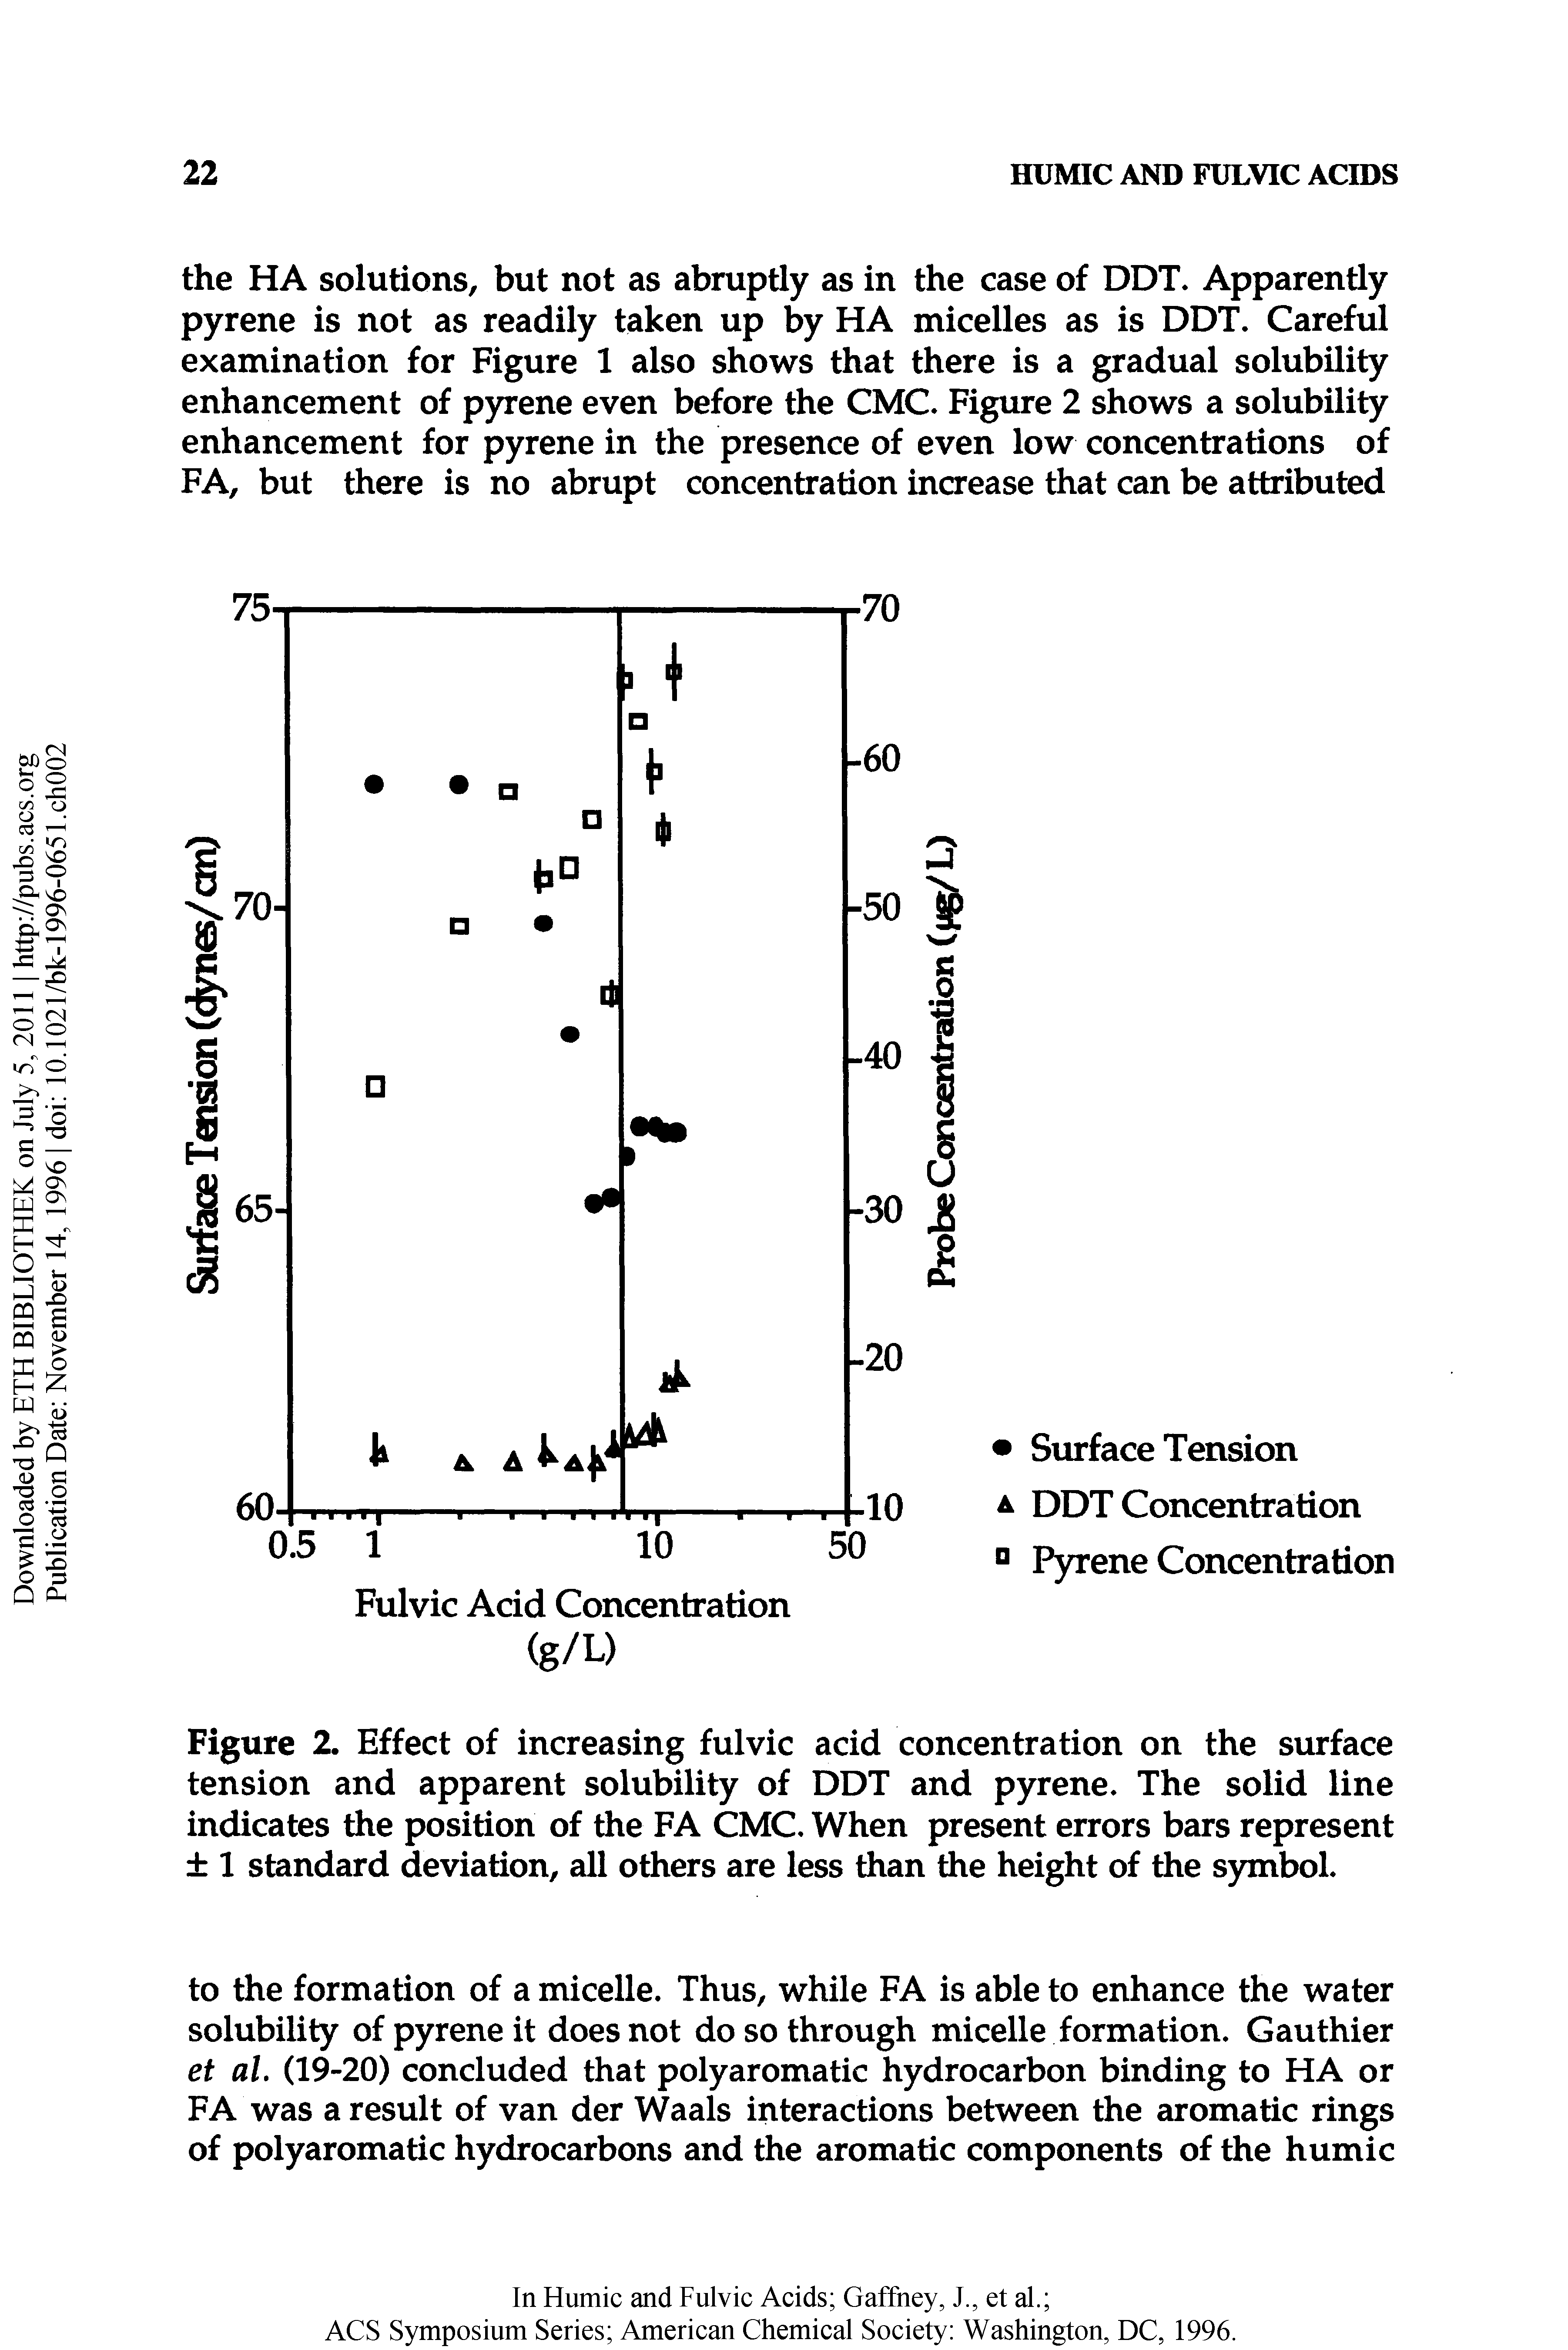 Figure 2. Effect of increasing fulvic acid concentration on the surface tension and apparent solubility of DDT and pyrene. The solid line indicates the position of the FA CMC. When present errors bars represent 1 standard deviation, all others are less than the height of the symbol.